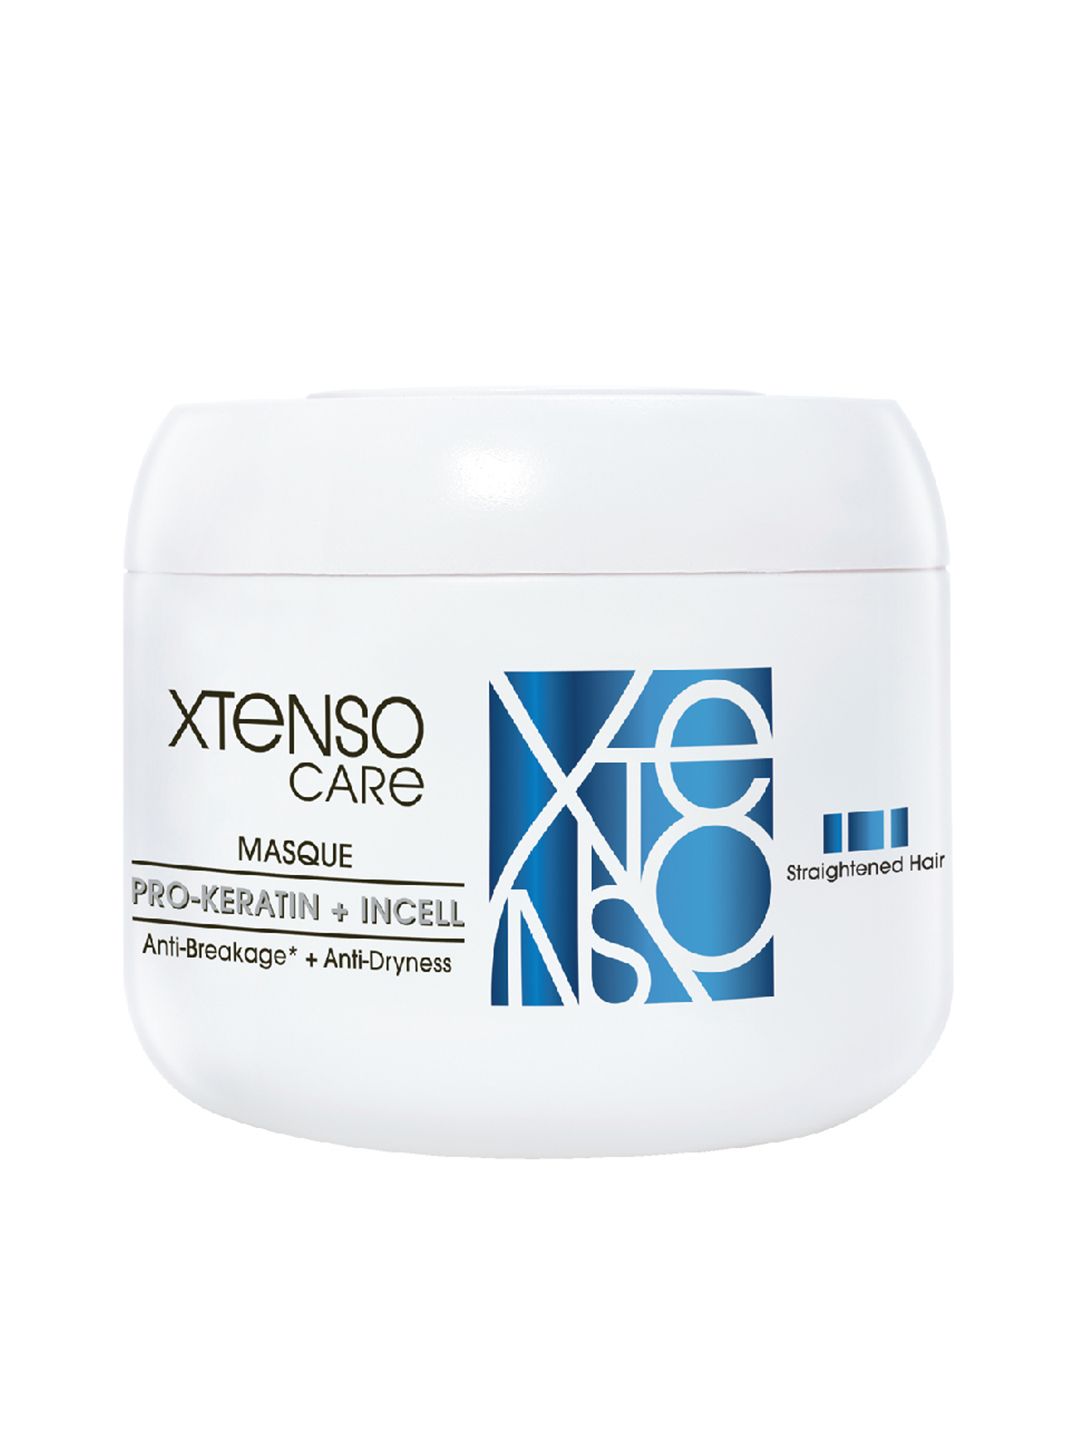 LOreal Professionnel Xtenso Care Mask 196g Price in India